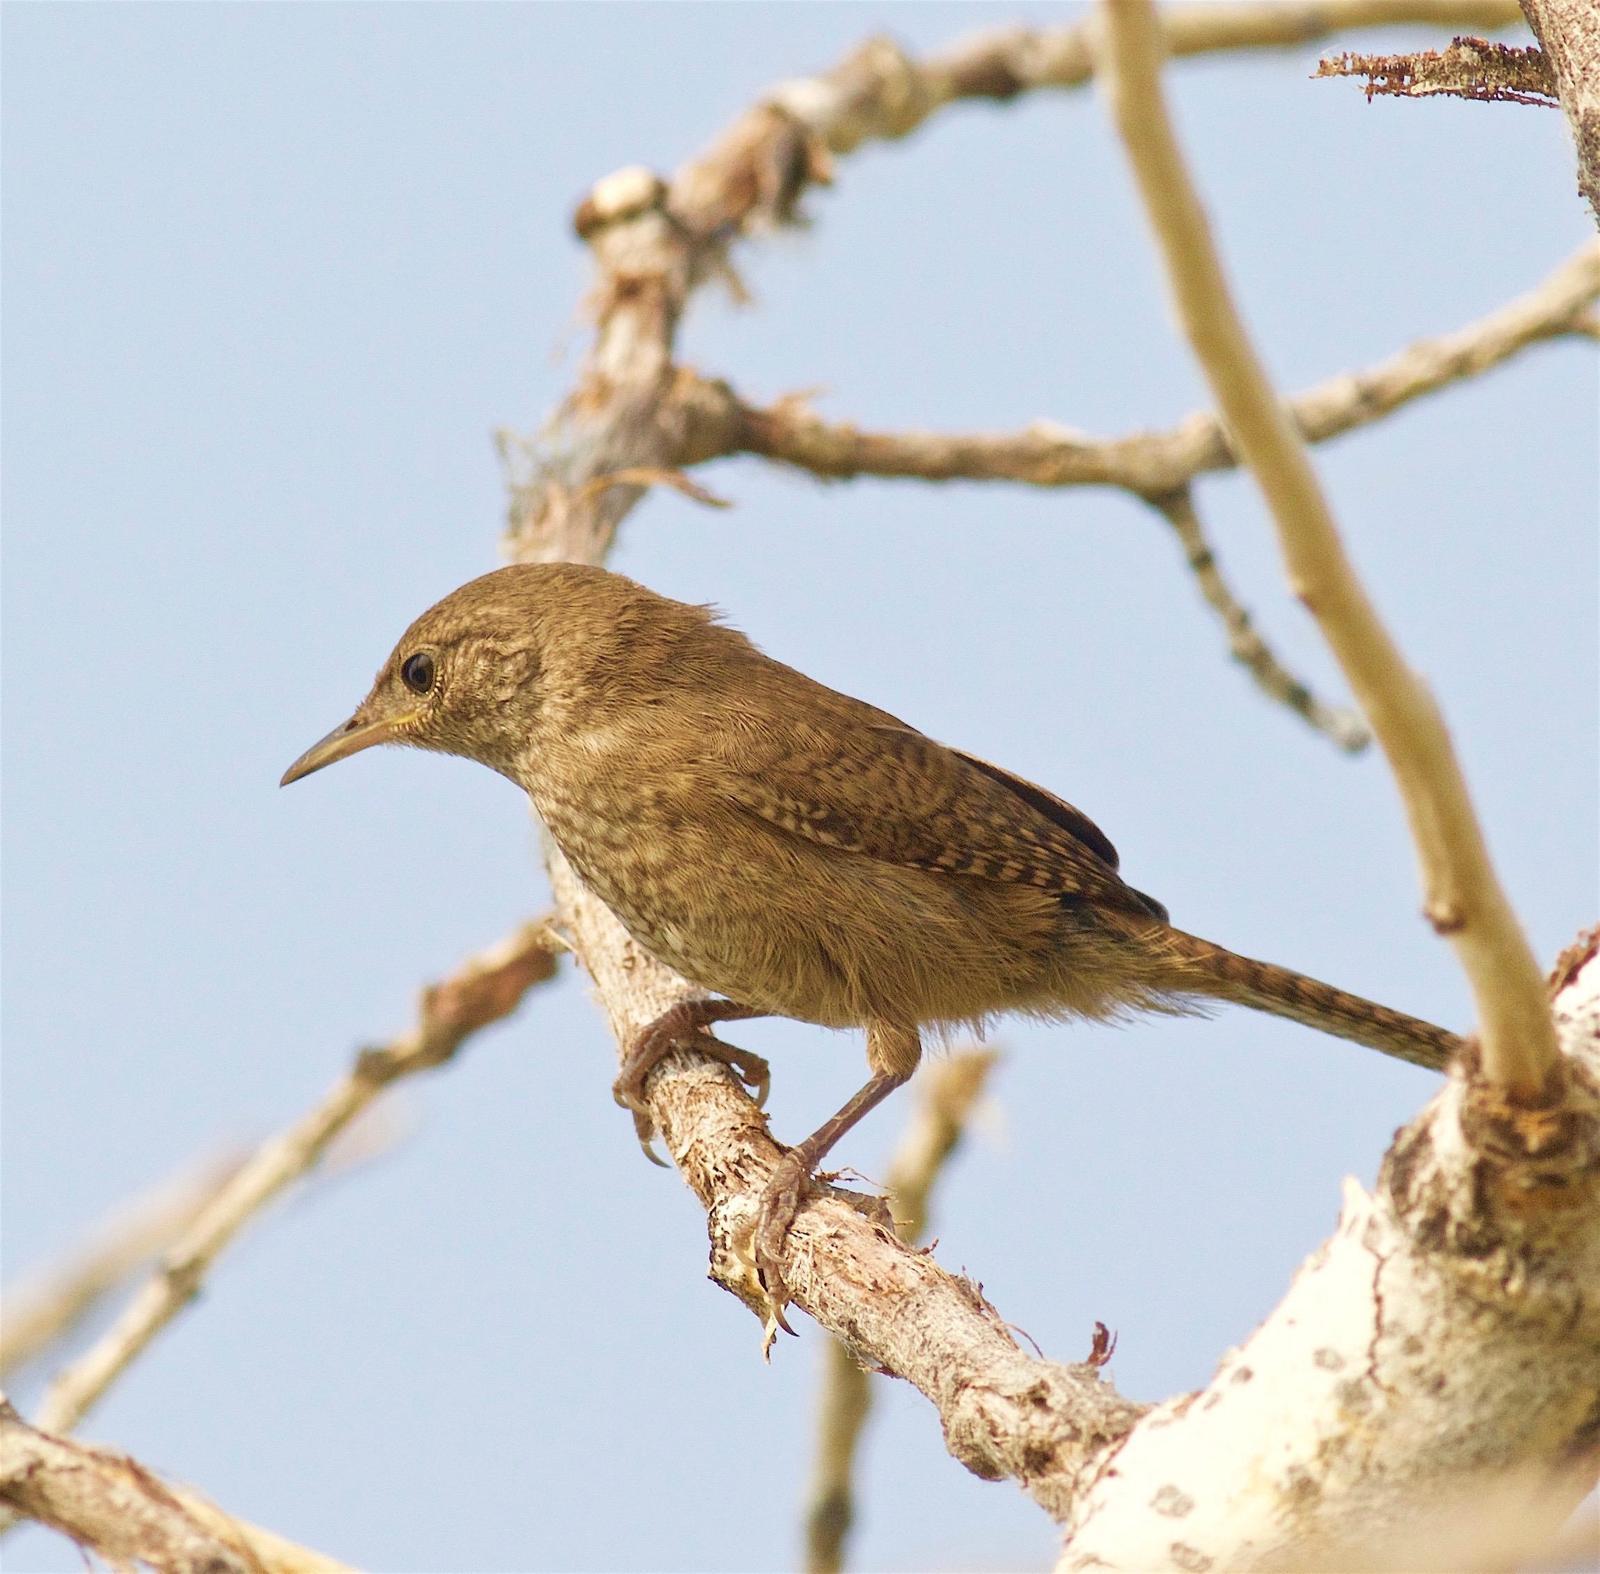 House Wren Photo by Kathryn Keith